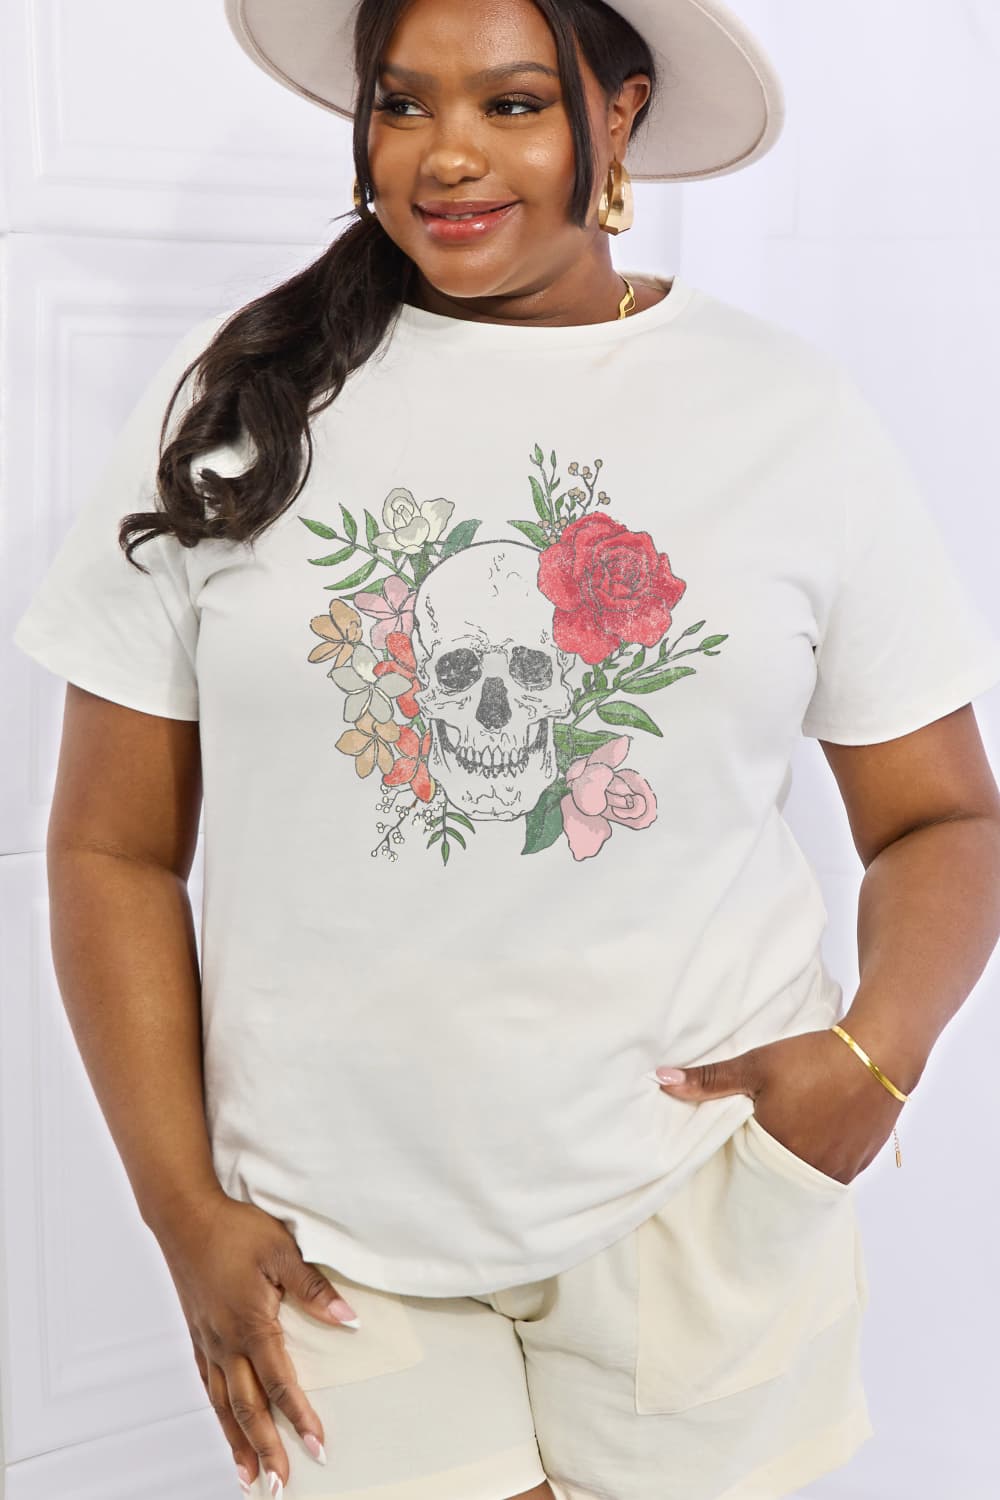 Simply Love Full Size Skull Graphic Cotton Tee